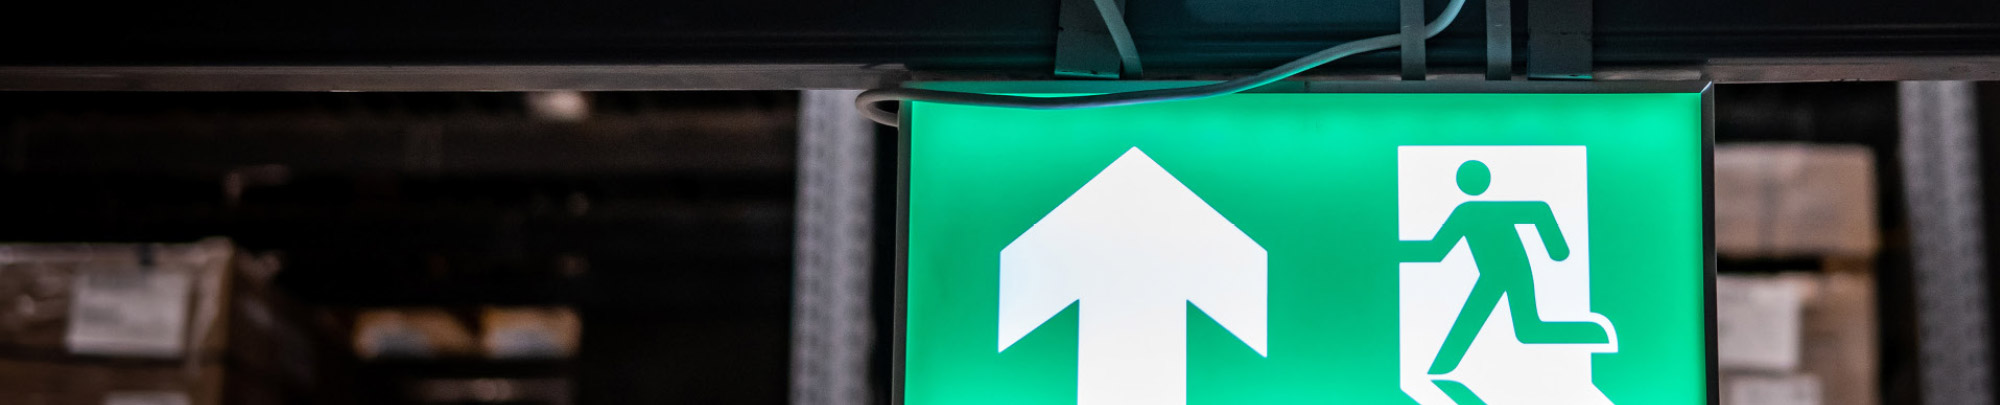 A green 'emergency exit' sign on top of a doorway